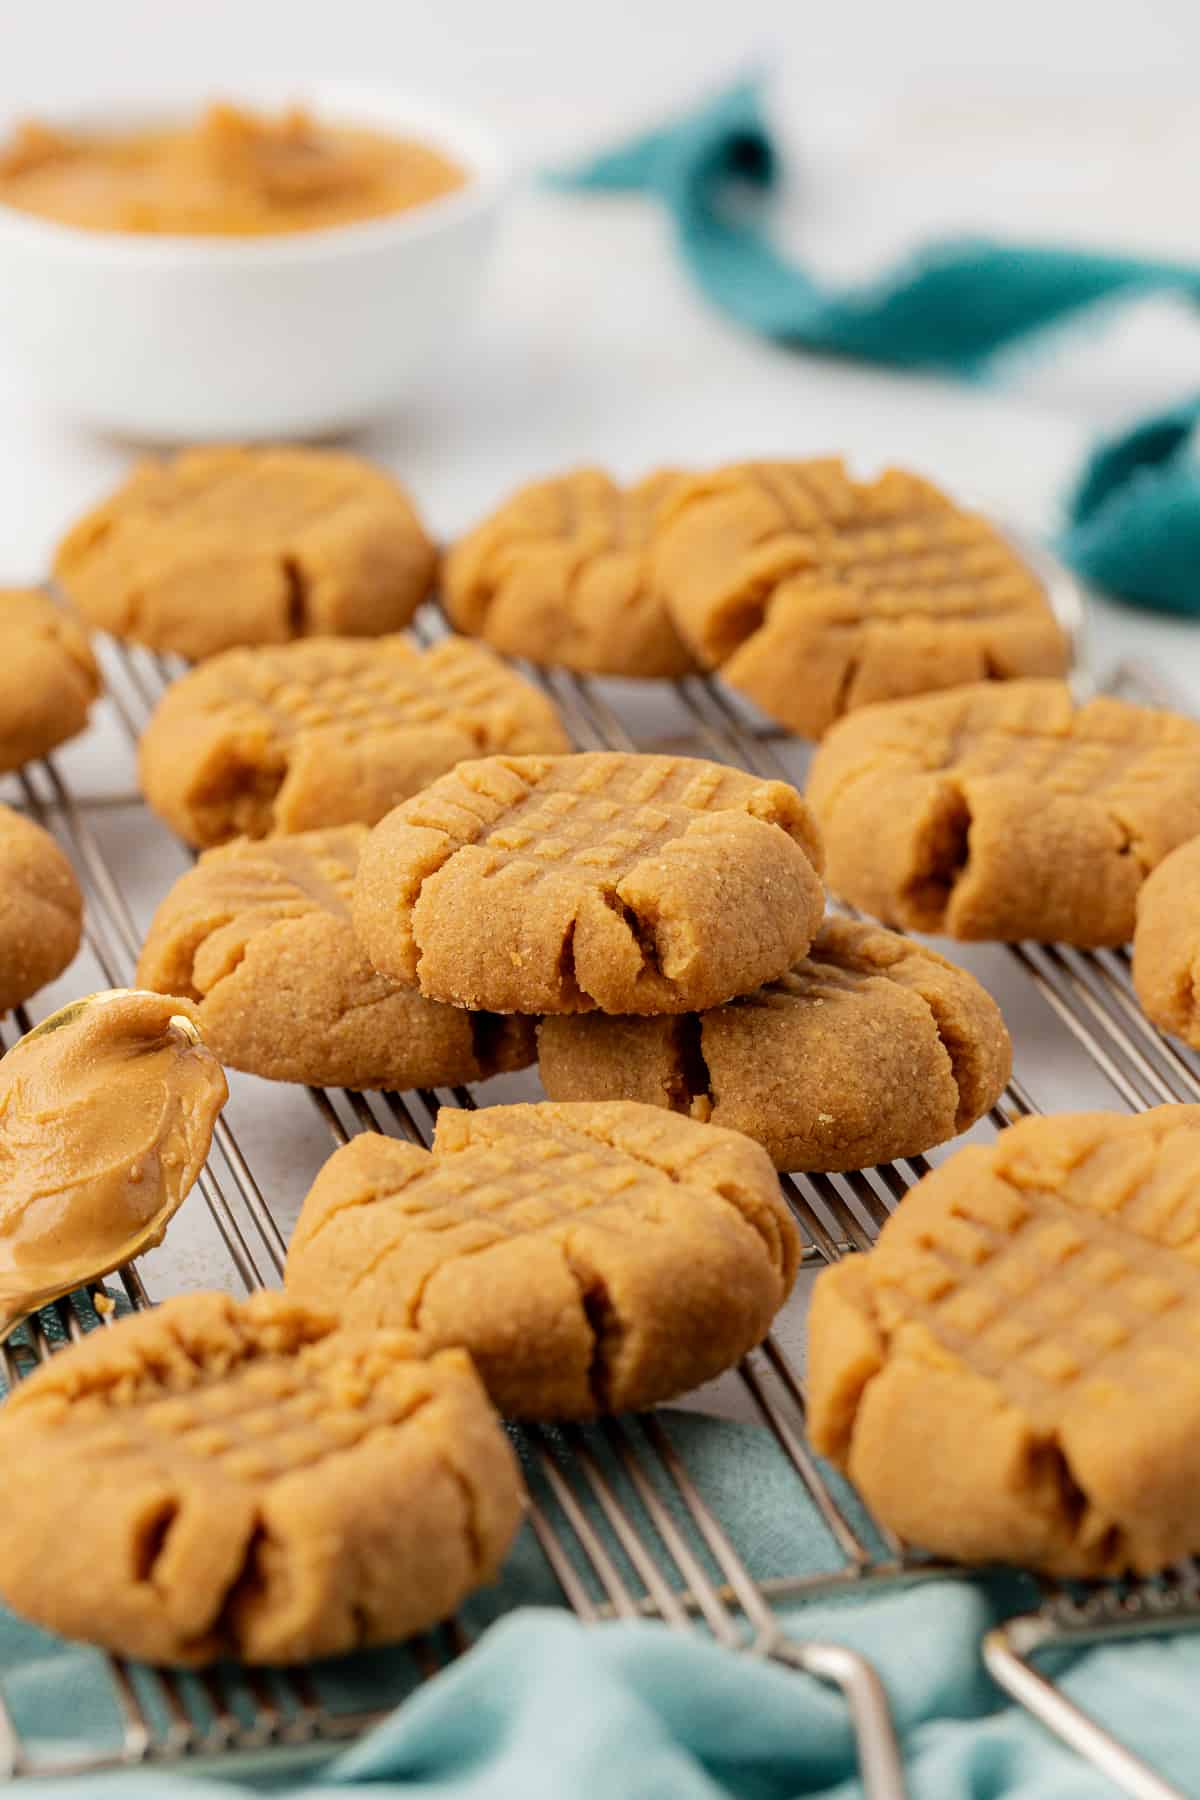 peanut butter cookies piled on a wire rack on top of a light teal towel with a bowl of peanut butter in the background